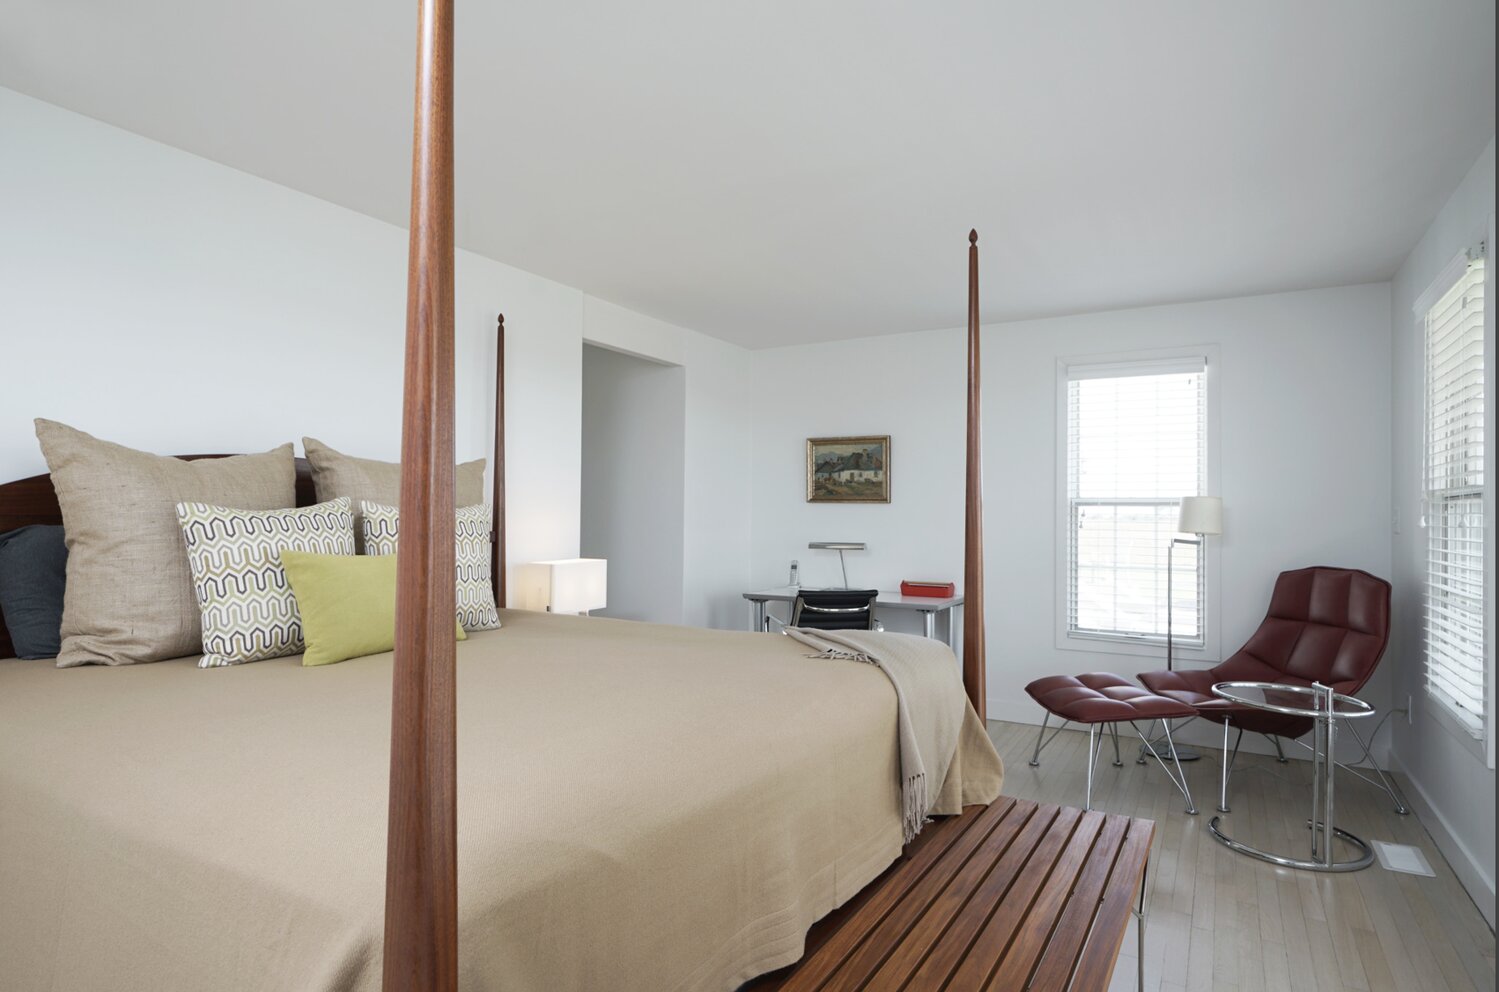 This second-floor bedroom has wood floors and enough space for a sitting area and small workspace.